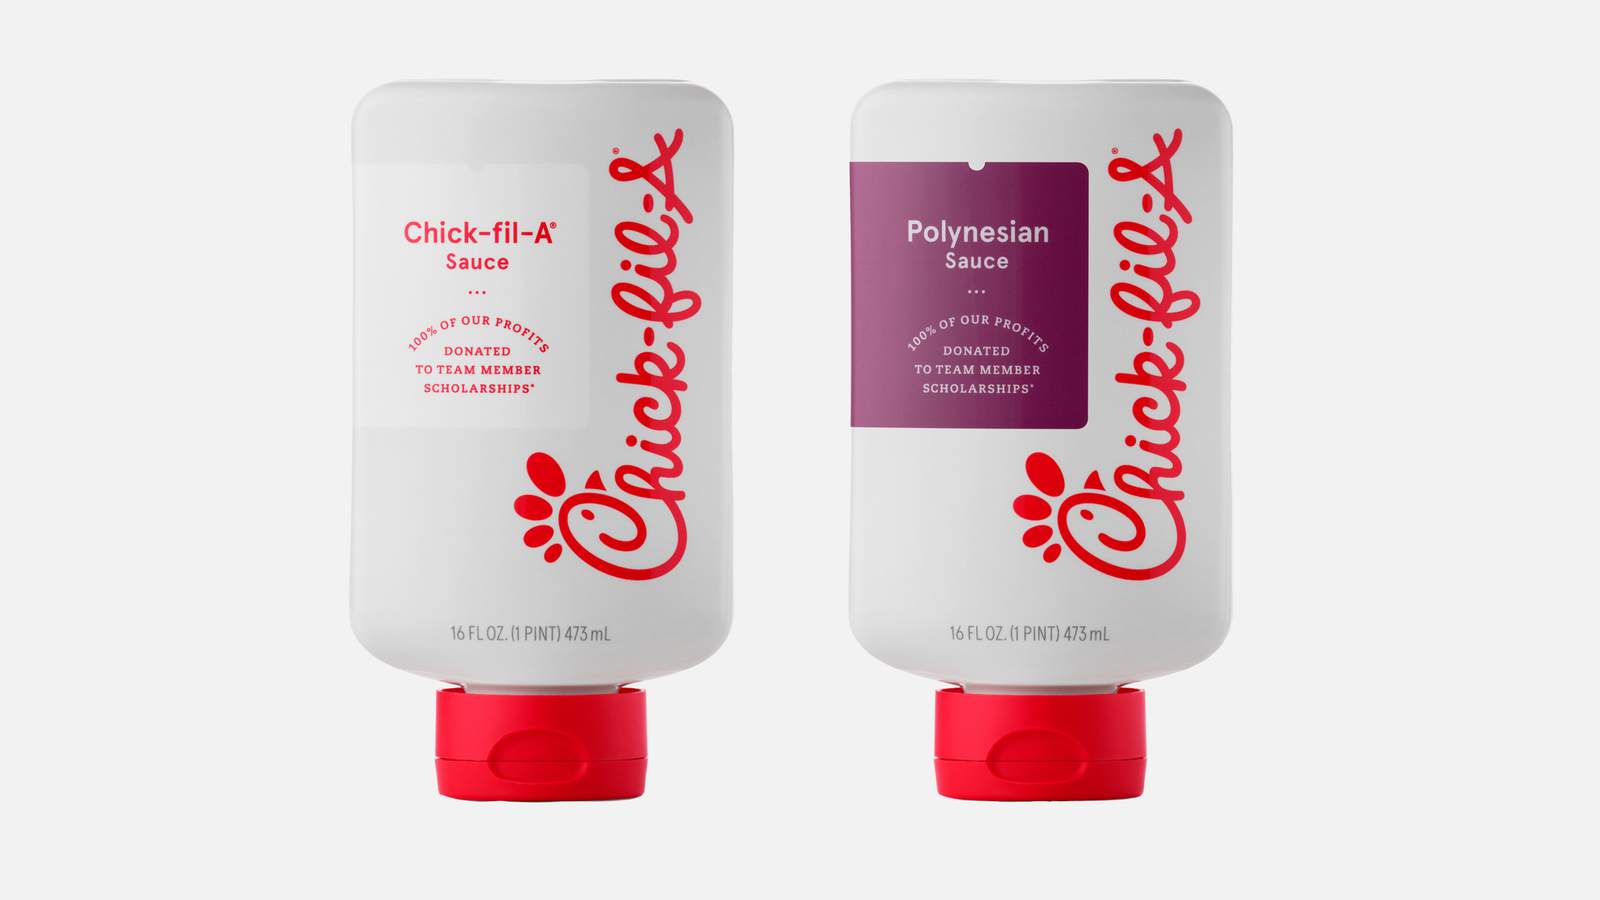 Chick-fil-A sauces to be sold in select retailers nationwide in 2021